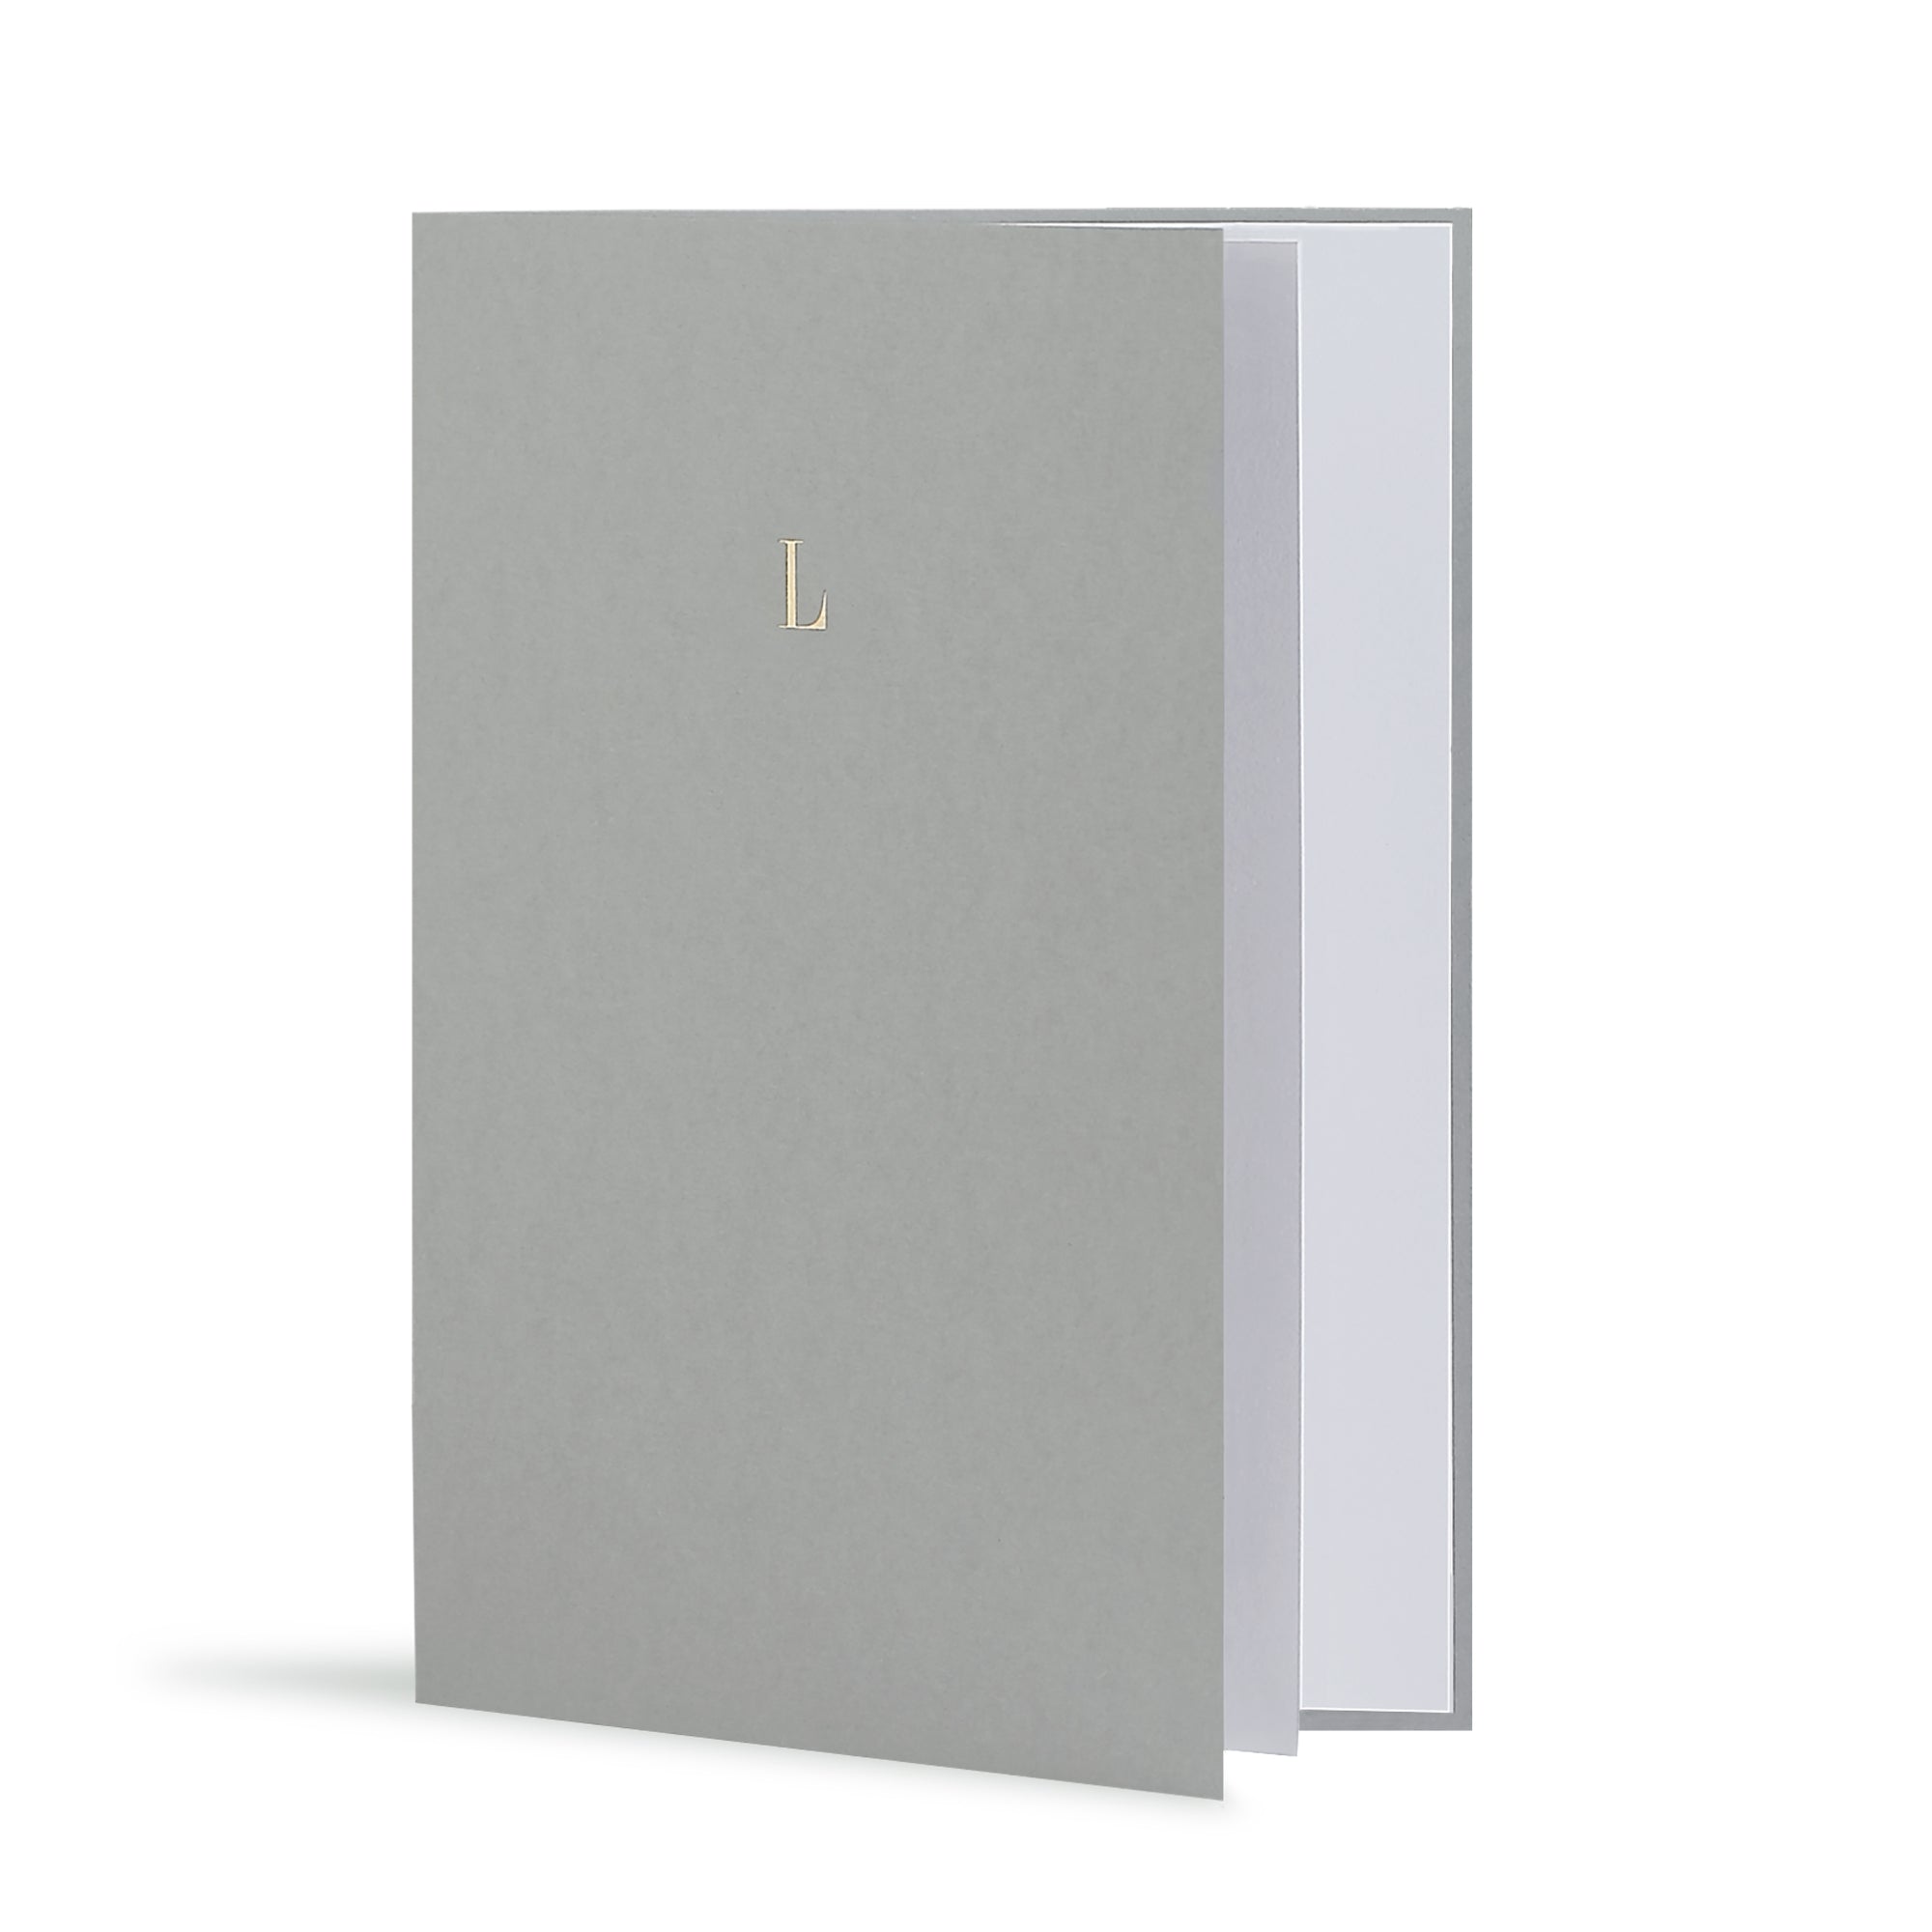 L Greeting Card in Grey, Side | Story of Elegance